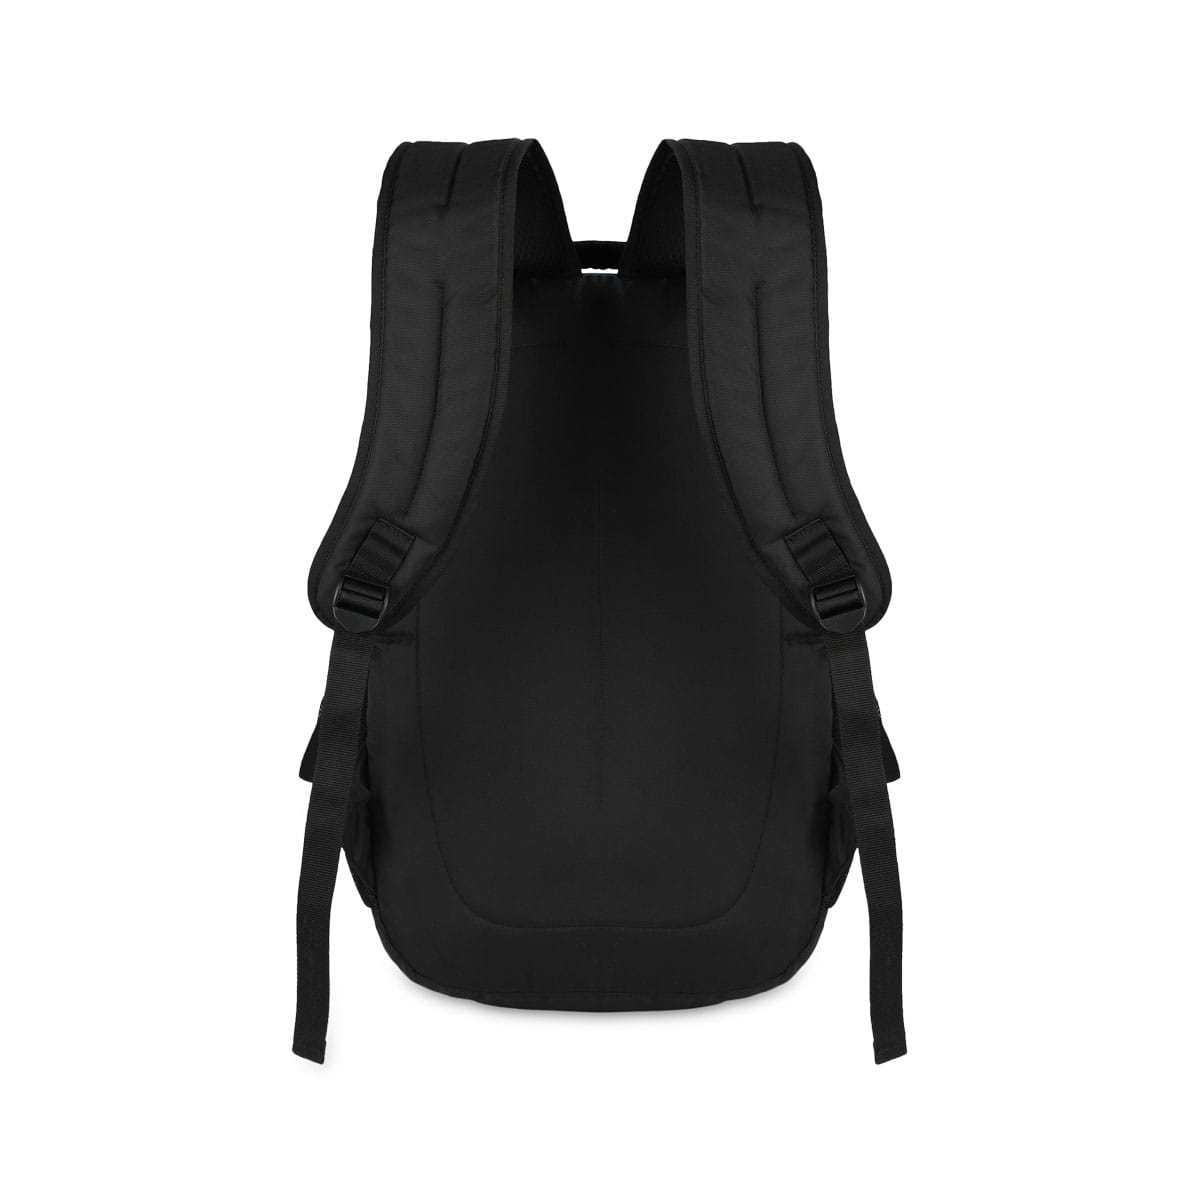 Black-Astral | Protecta Twister Laptop Backpack-3